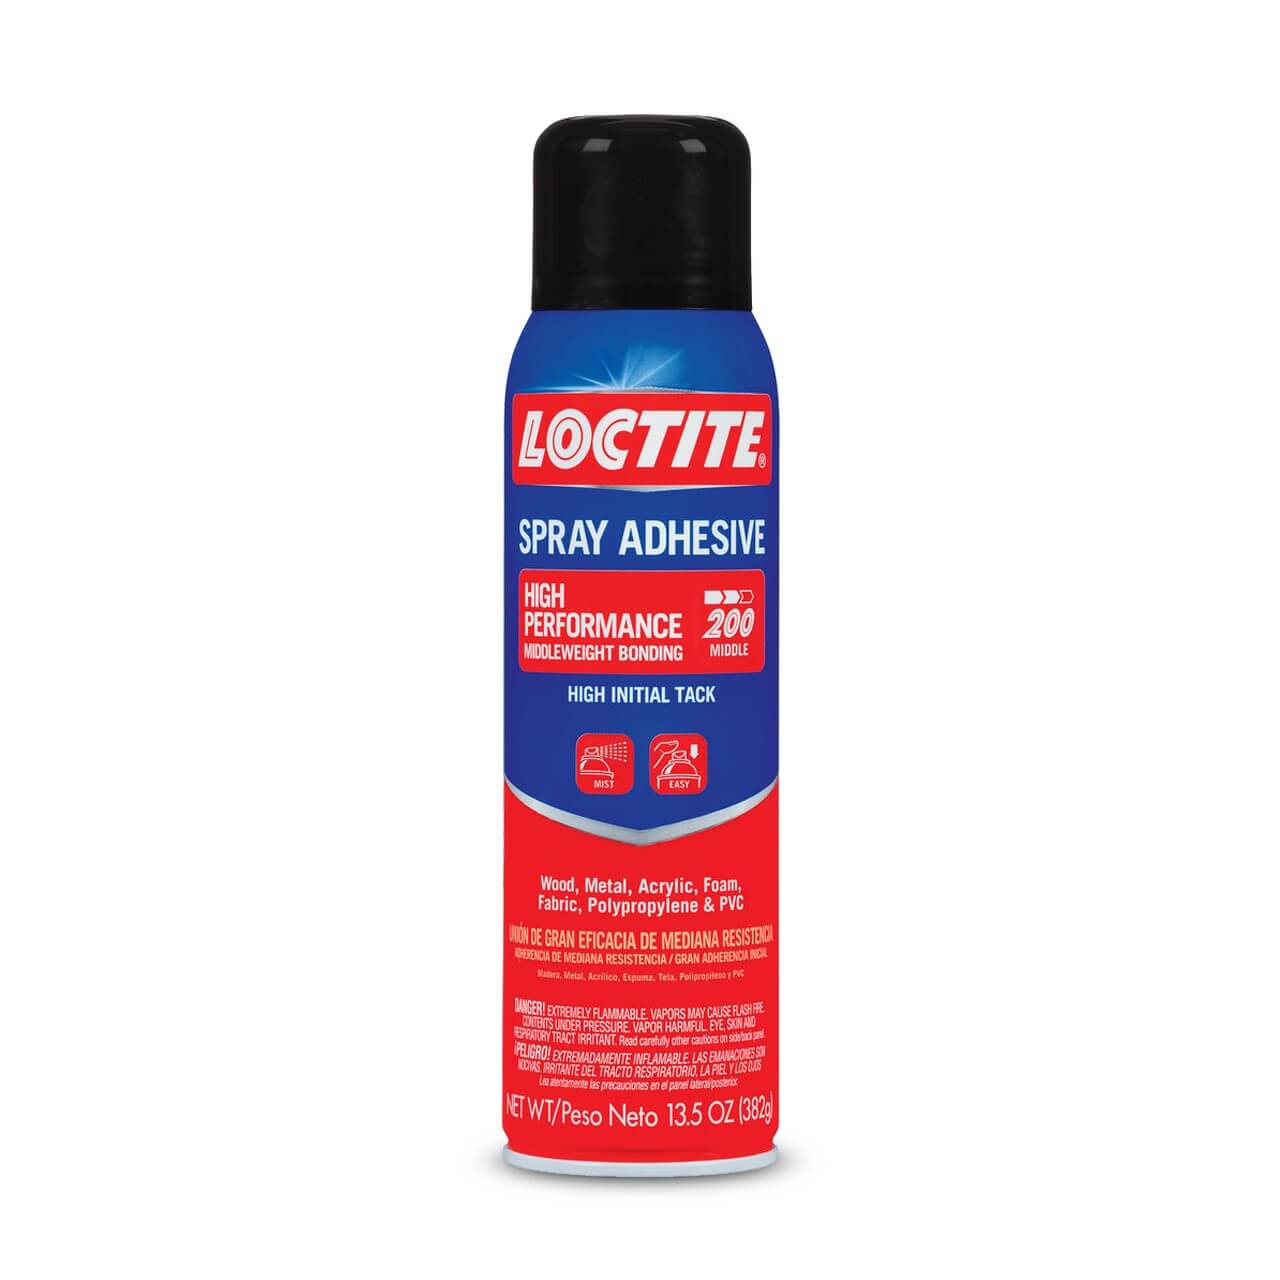 Can of Loctite spray adhesive